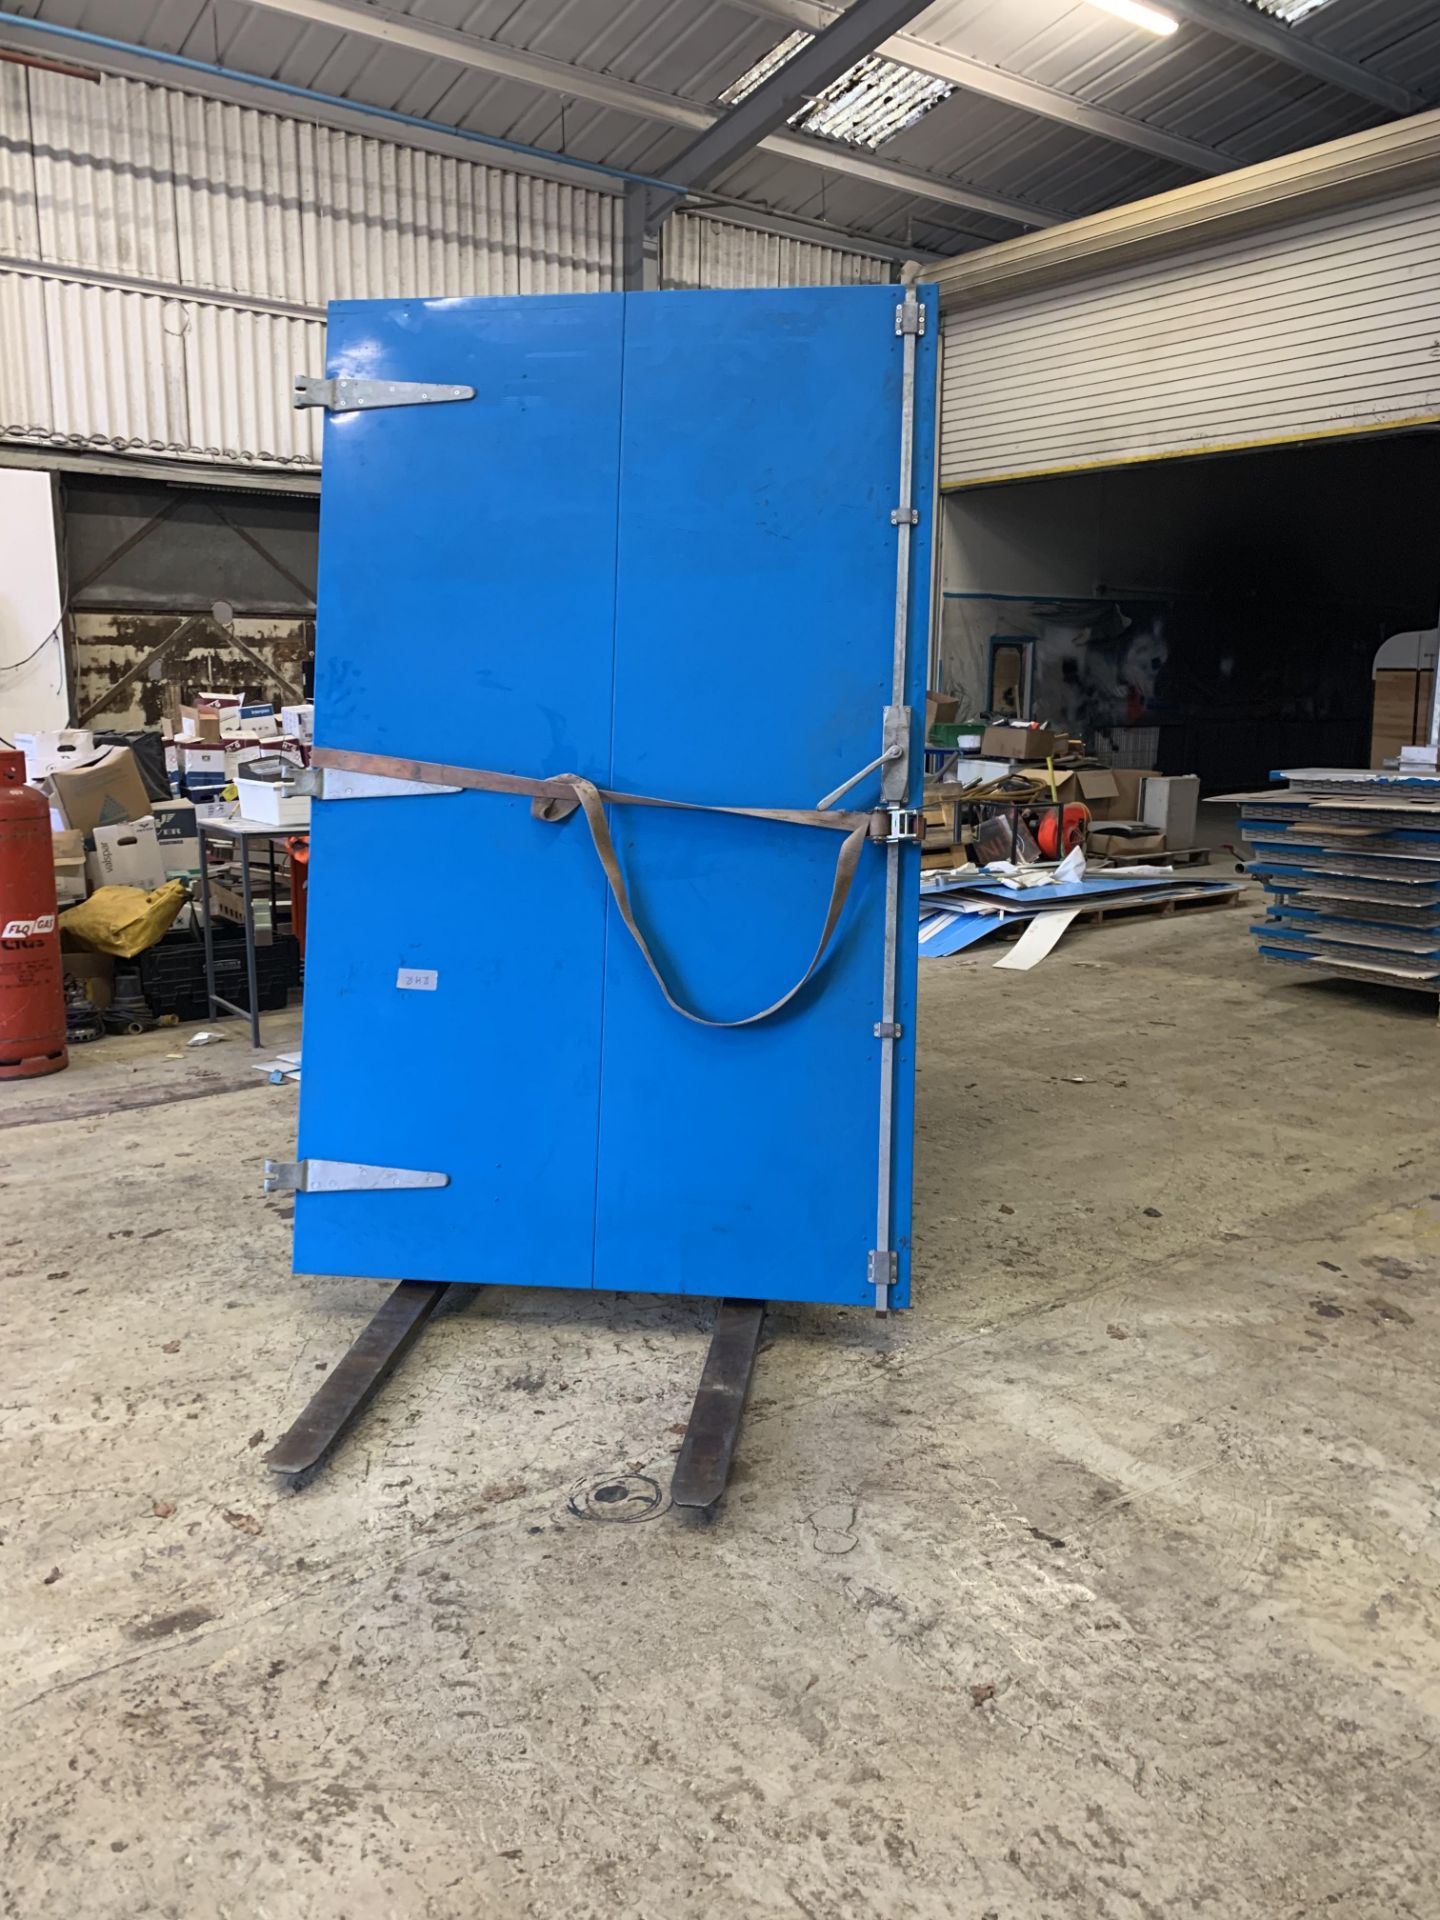 Industrial Gas Powder Oven 2016| L 5.5m X W 4m X H 280010m | Disassembled - Image 6 of 16